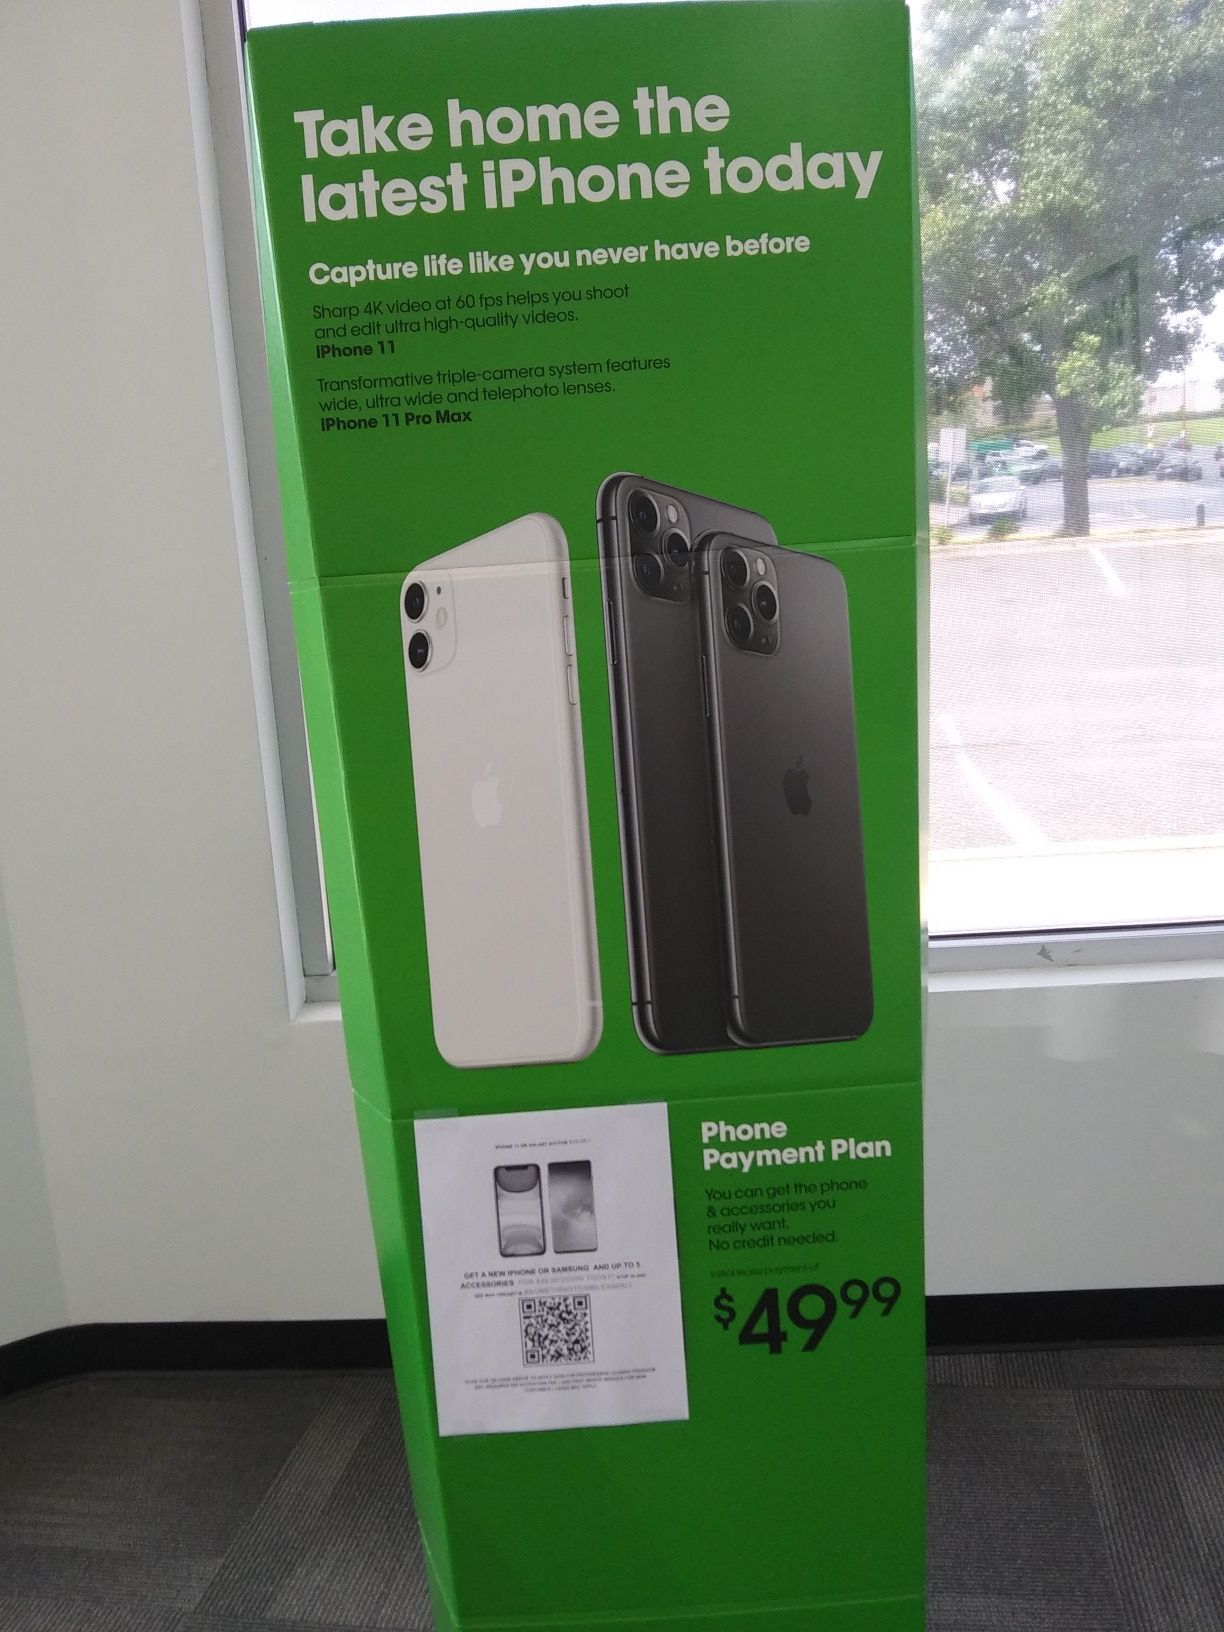 Get a Iphone 11 pro max for $49.99 at Cricket Wireless New Carrollton MD